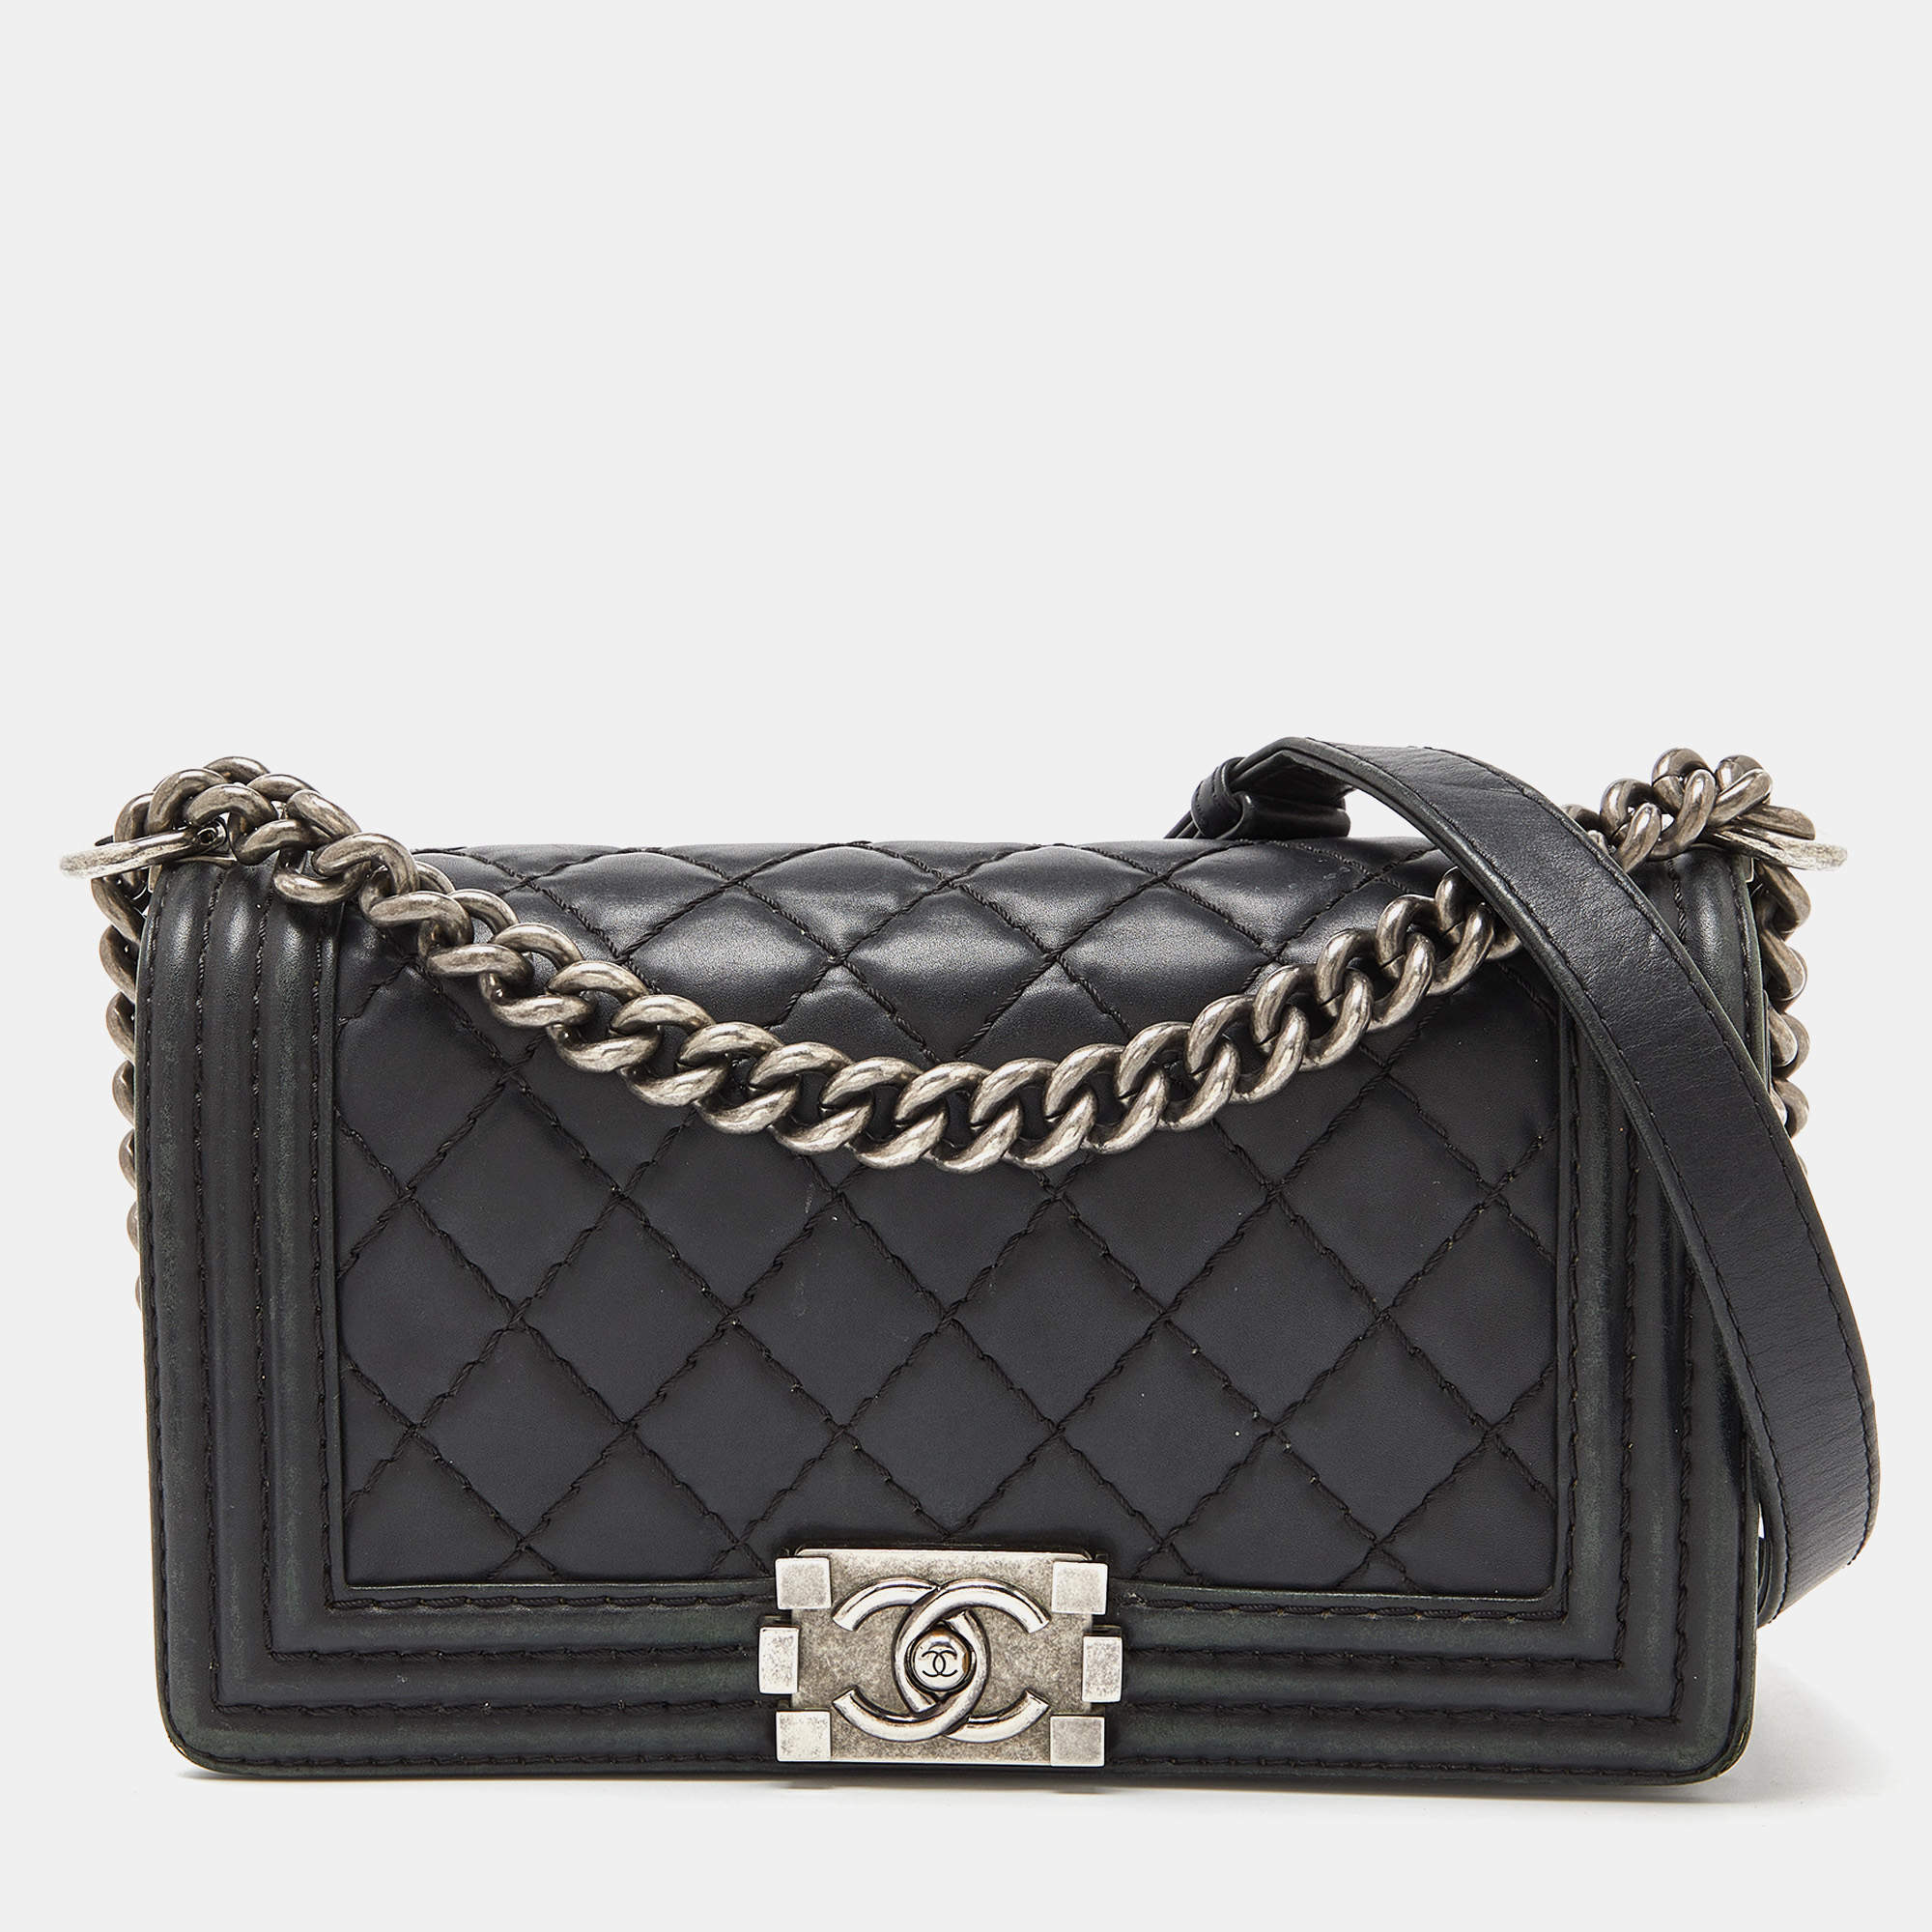 Chanel Black Quilted Wild Stitched Leather Medium Boy Bag Chanel